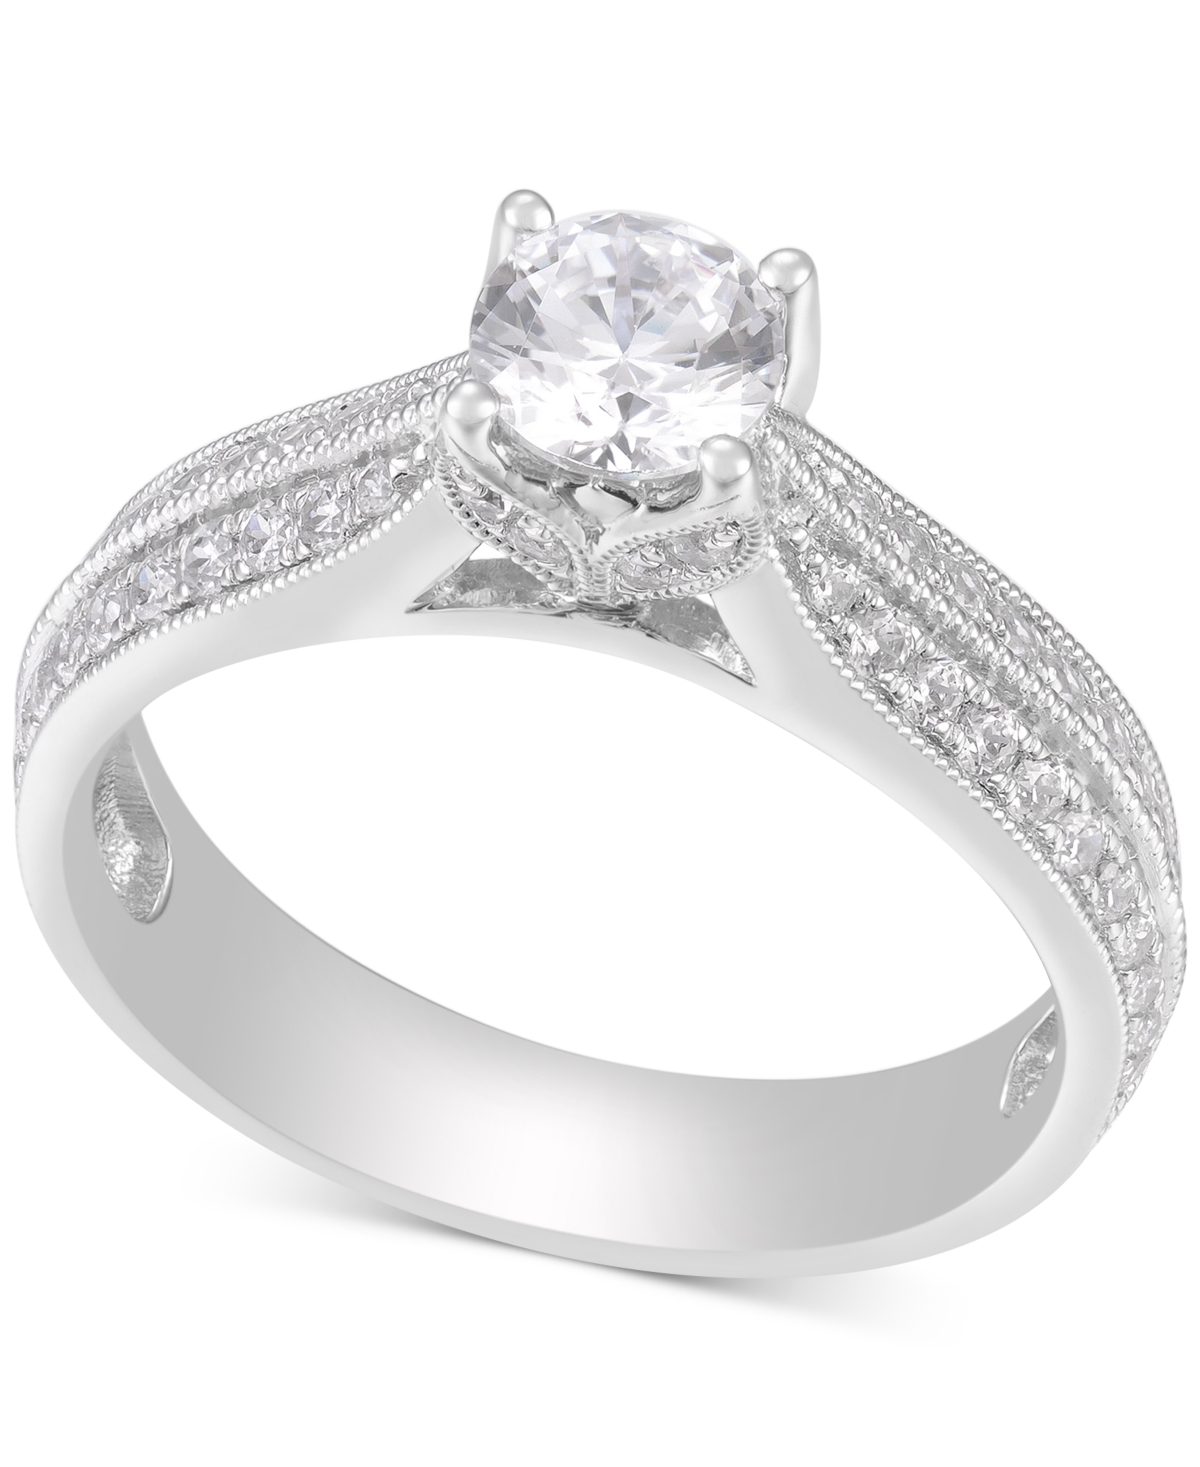 Diamond Triple Row Engagement Ring (1 ct. t.w.) in 14k White Gold - White Gold